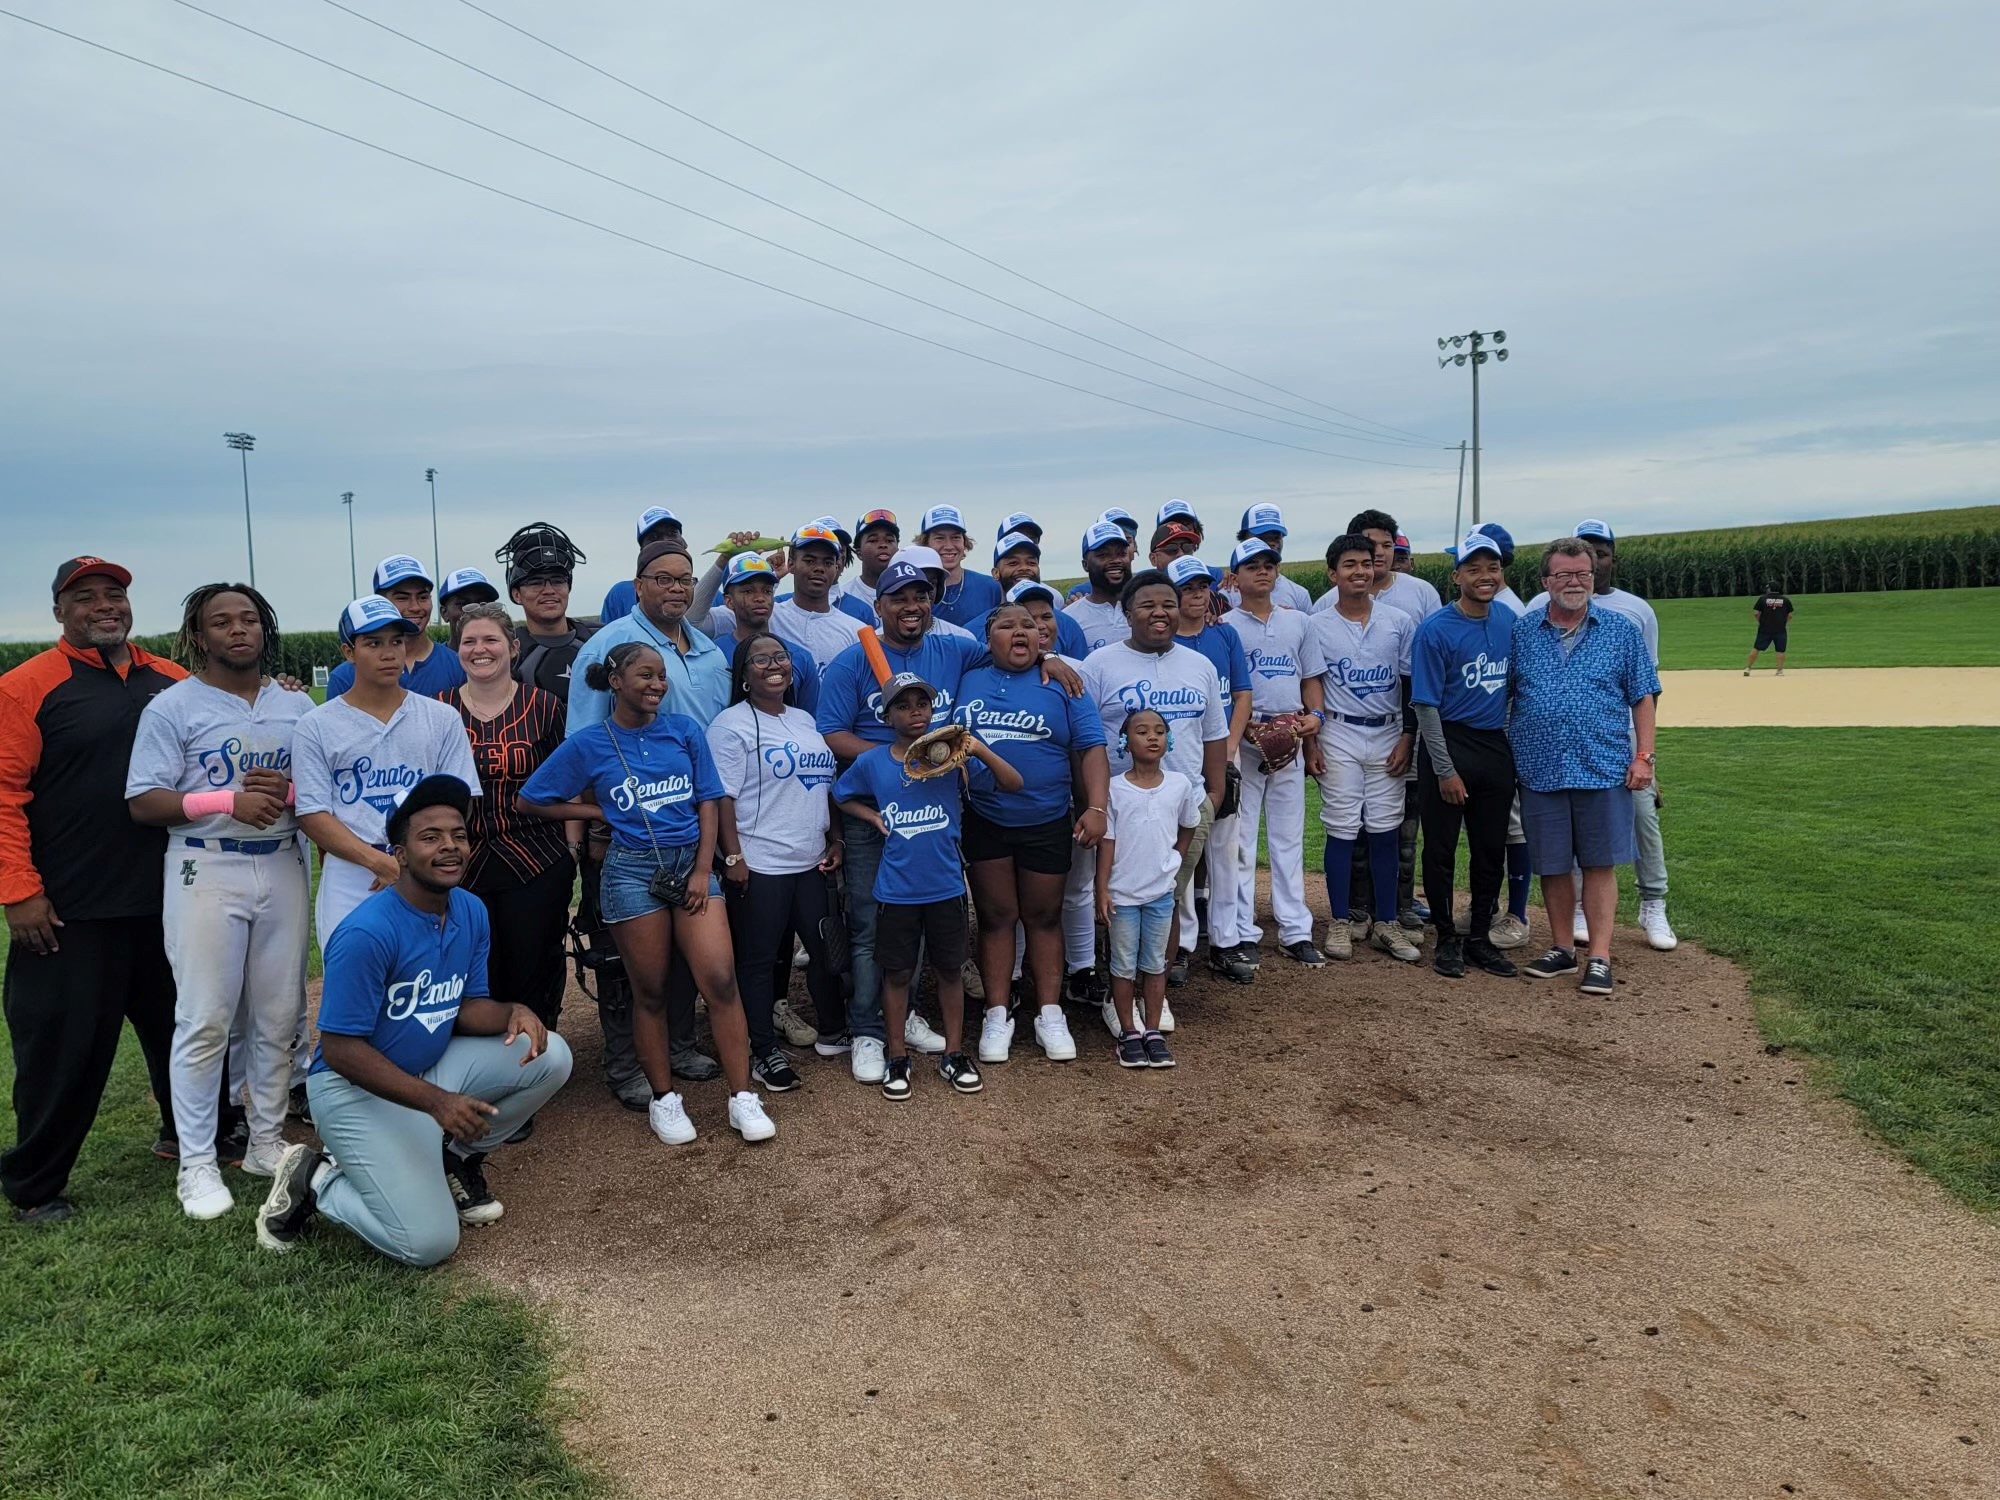 State Senator Willie Preston and little leauge players at the Field of Dreams